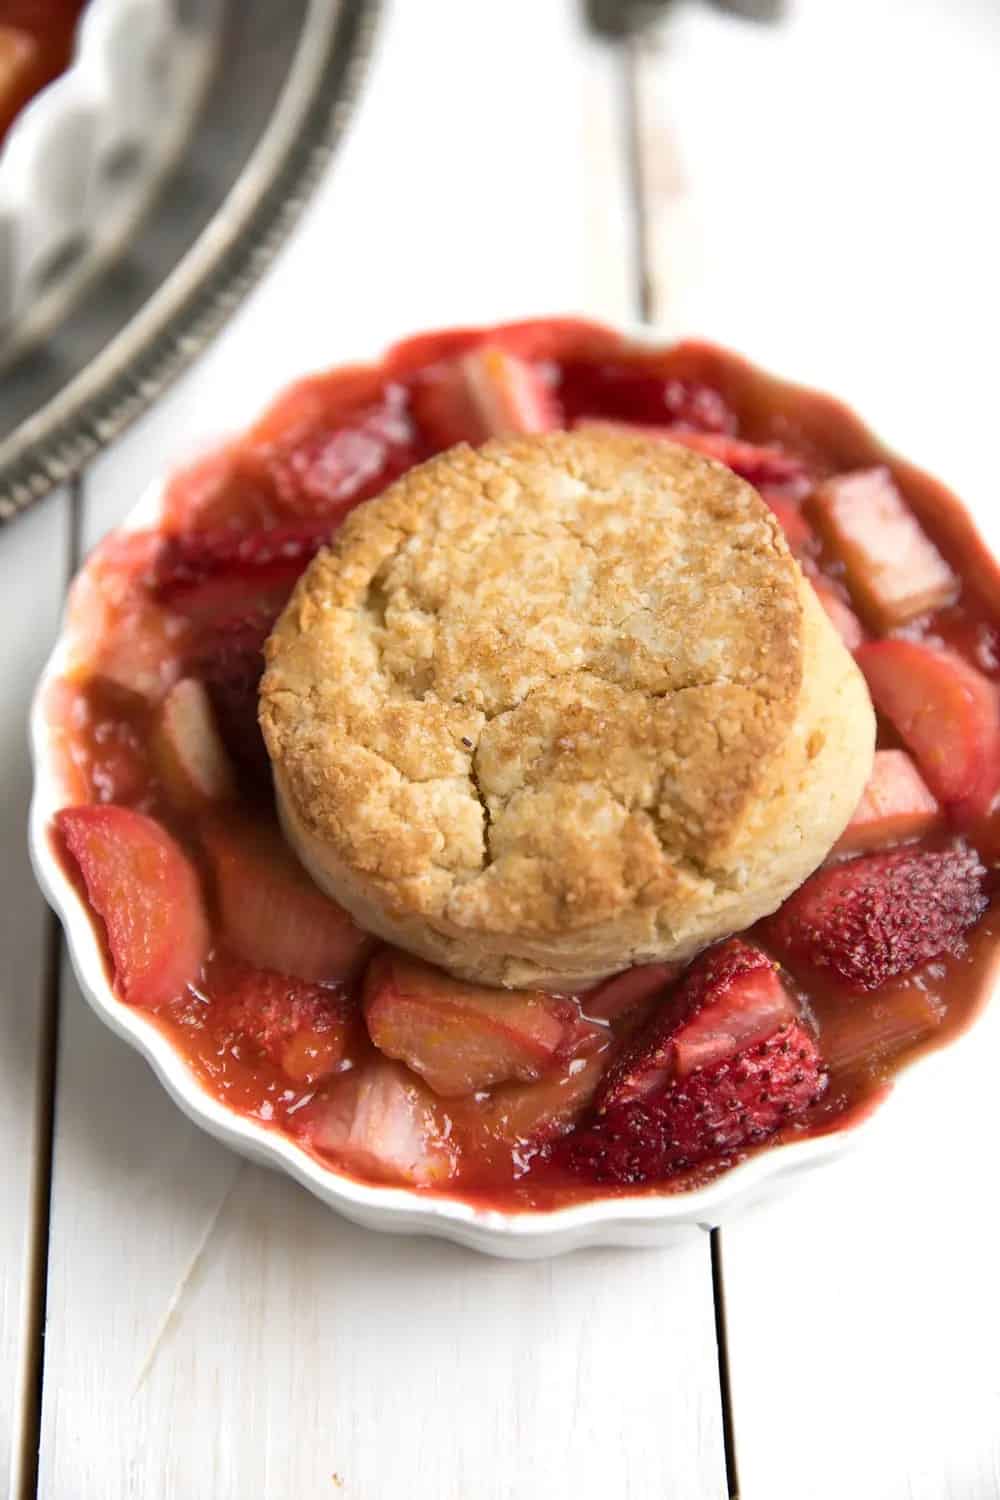 rhubarb cobbler topped with a biscuit in a white dish.